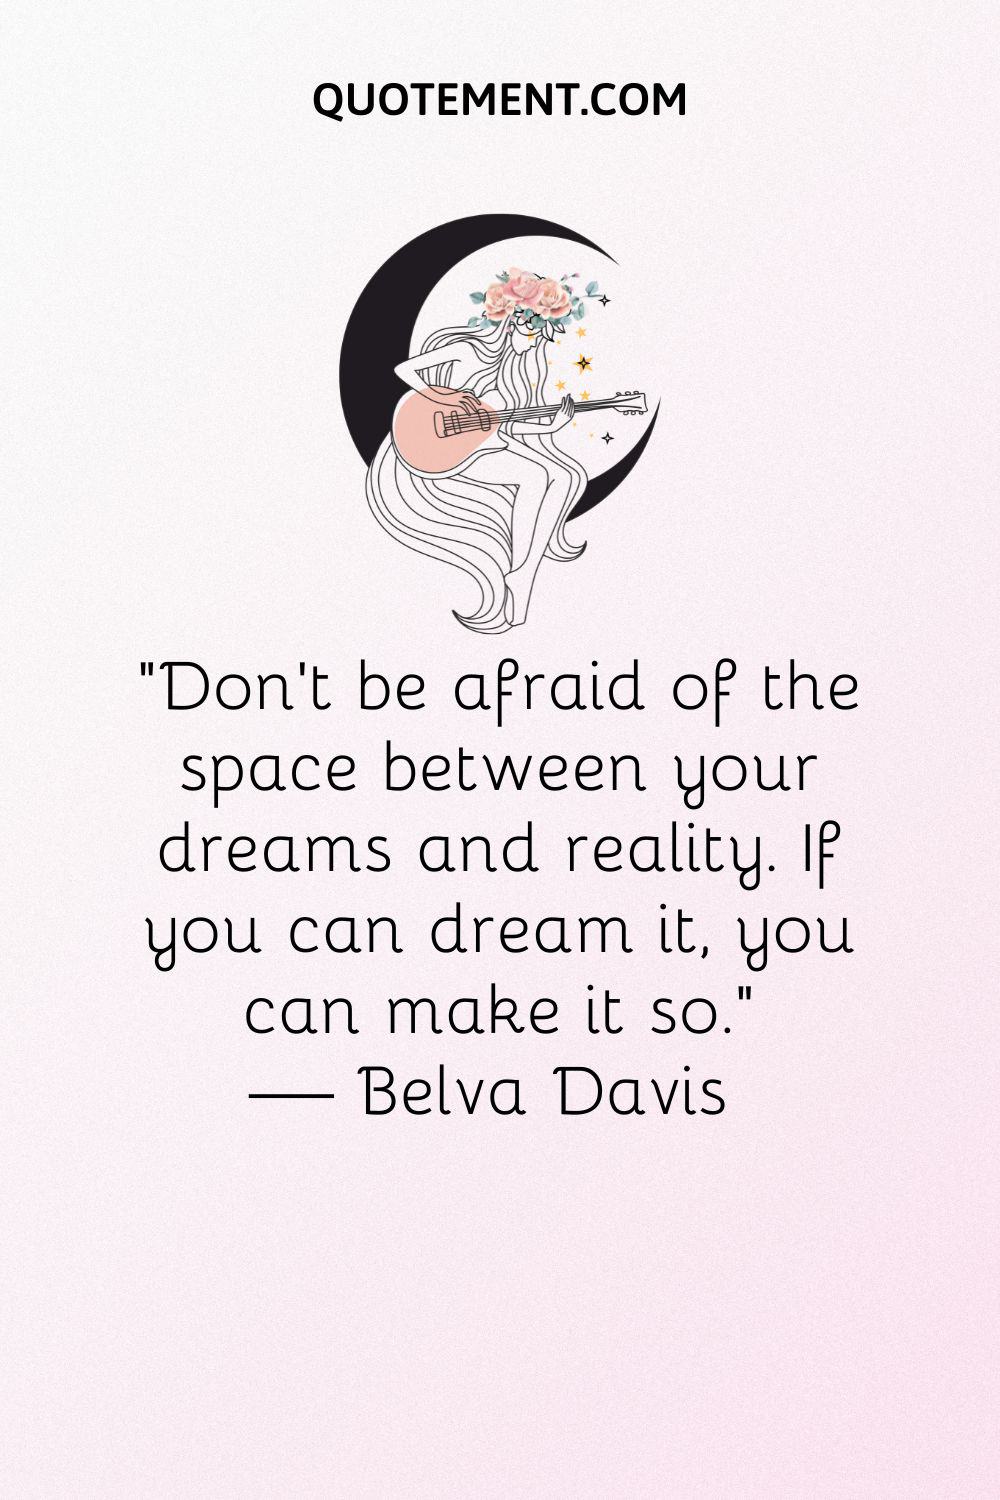 illustration of a girl playing the guitar on the moon representing chase your dreams quote